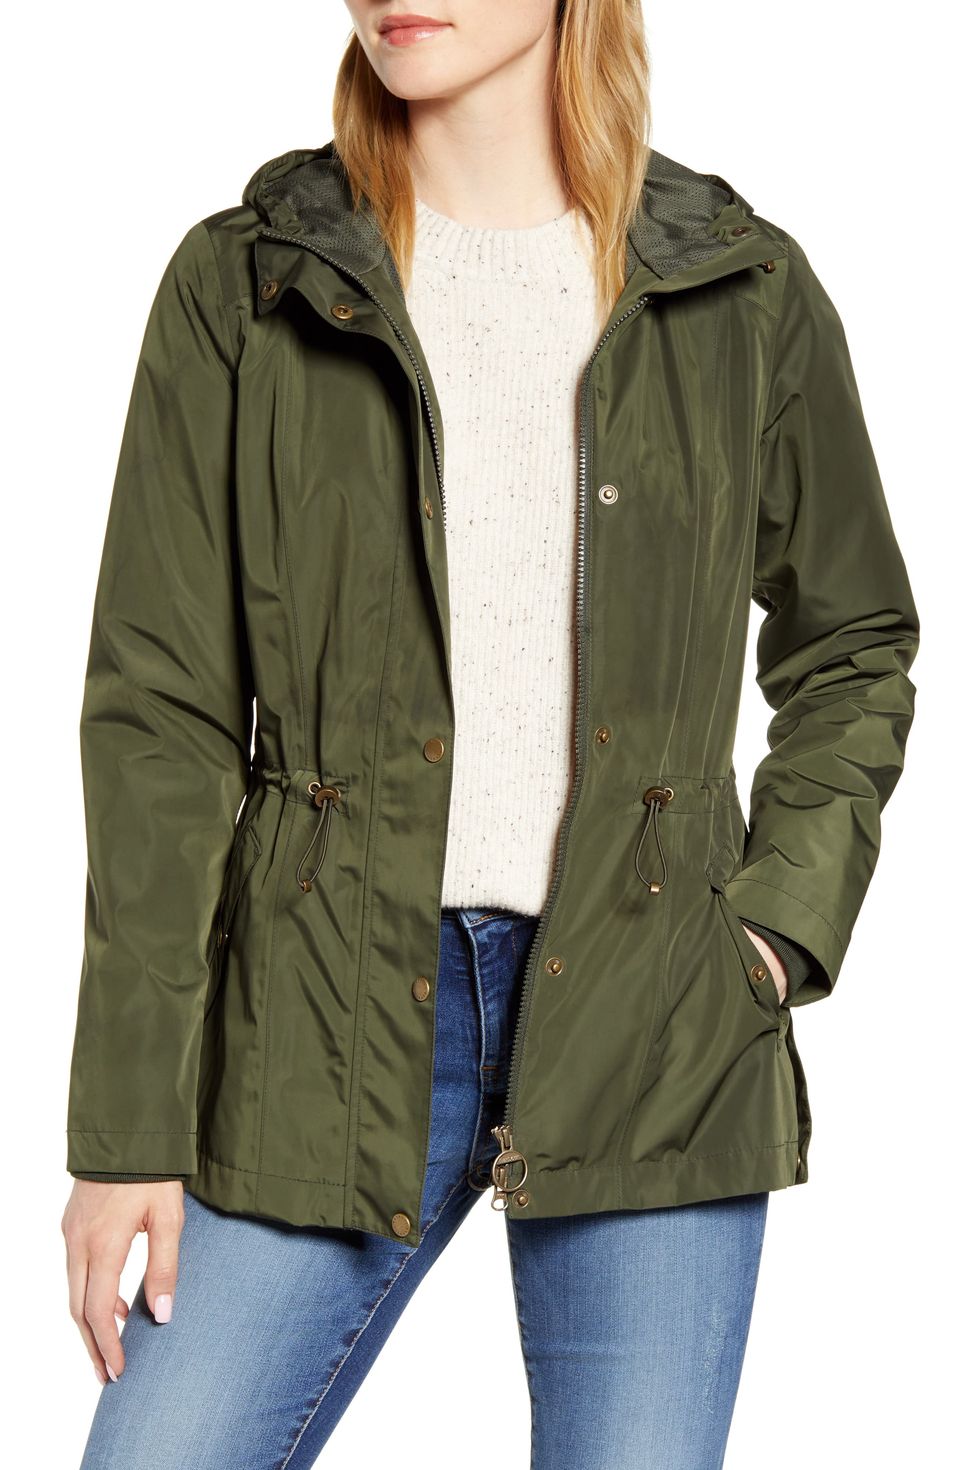 Shop Barbour Jackets at Nordstrom's Anniversary Sale